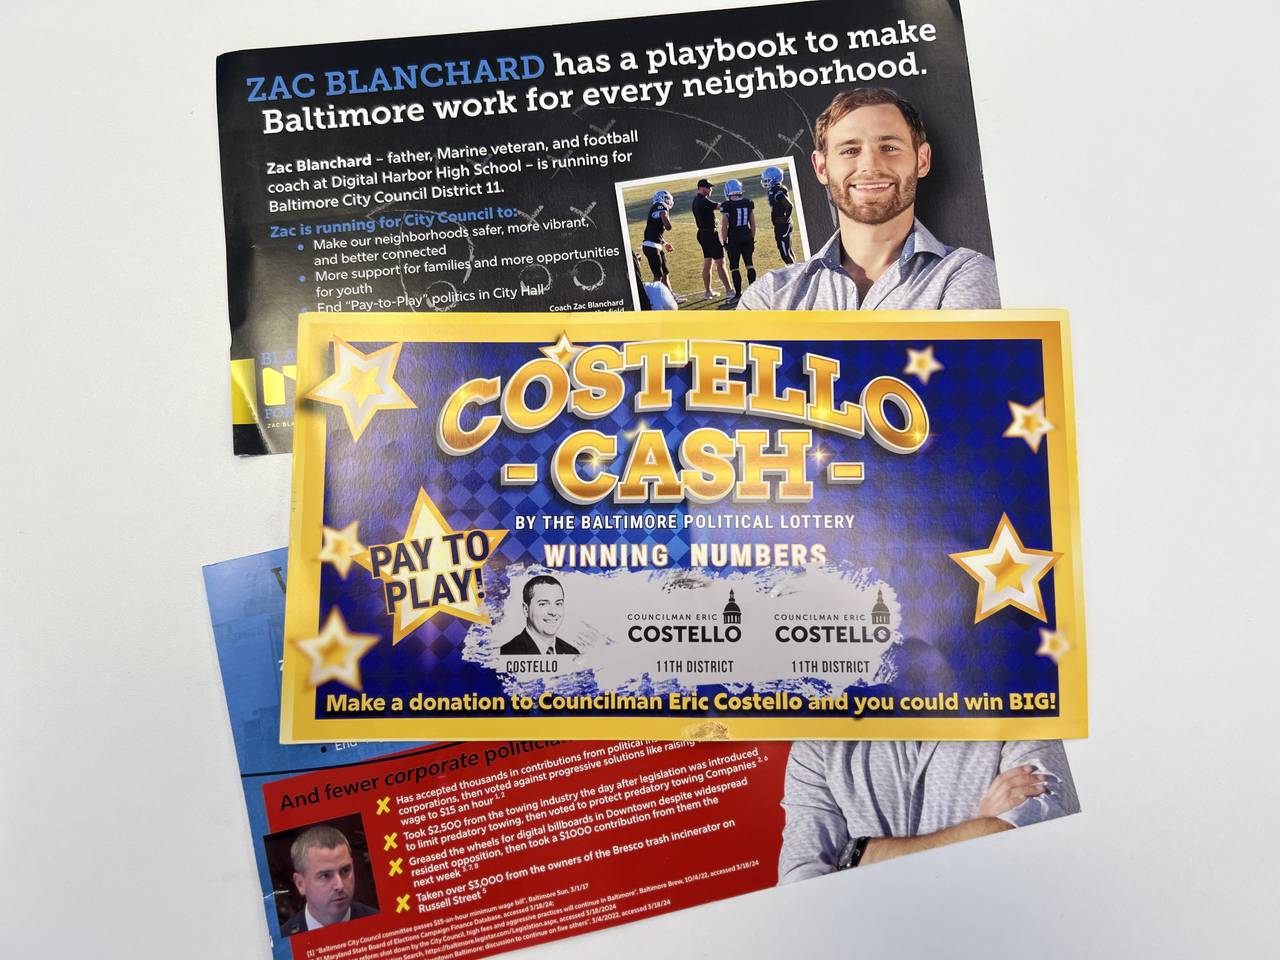 A mailer sent by Blanchard's campaign is designed to look like a scratch-off lottery ticket, saying: "Make a donation to Councilman Eric Costello and you could win BIG!"